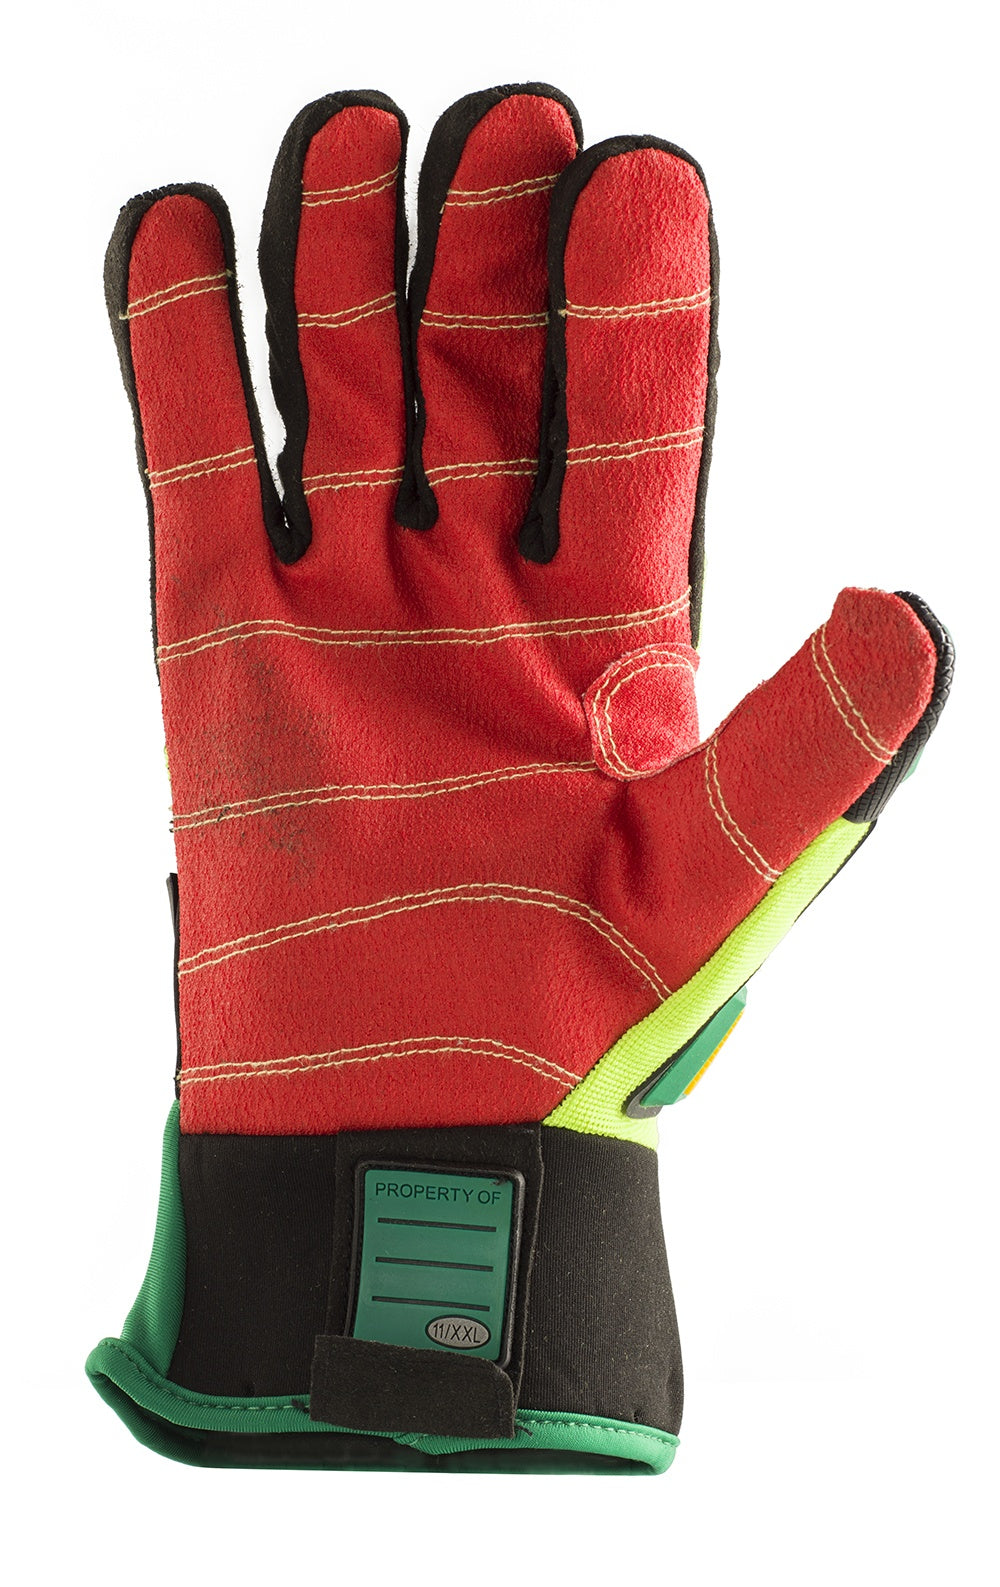 Roots RO50500 On Impact Rigger Gloves Keprotec Palm Size 2XL